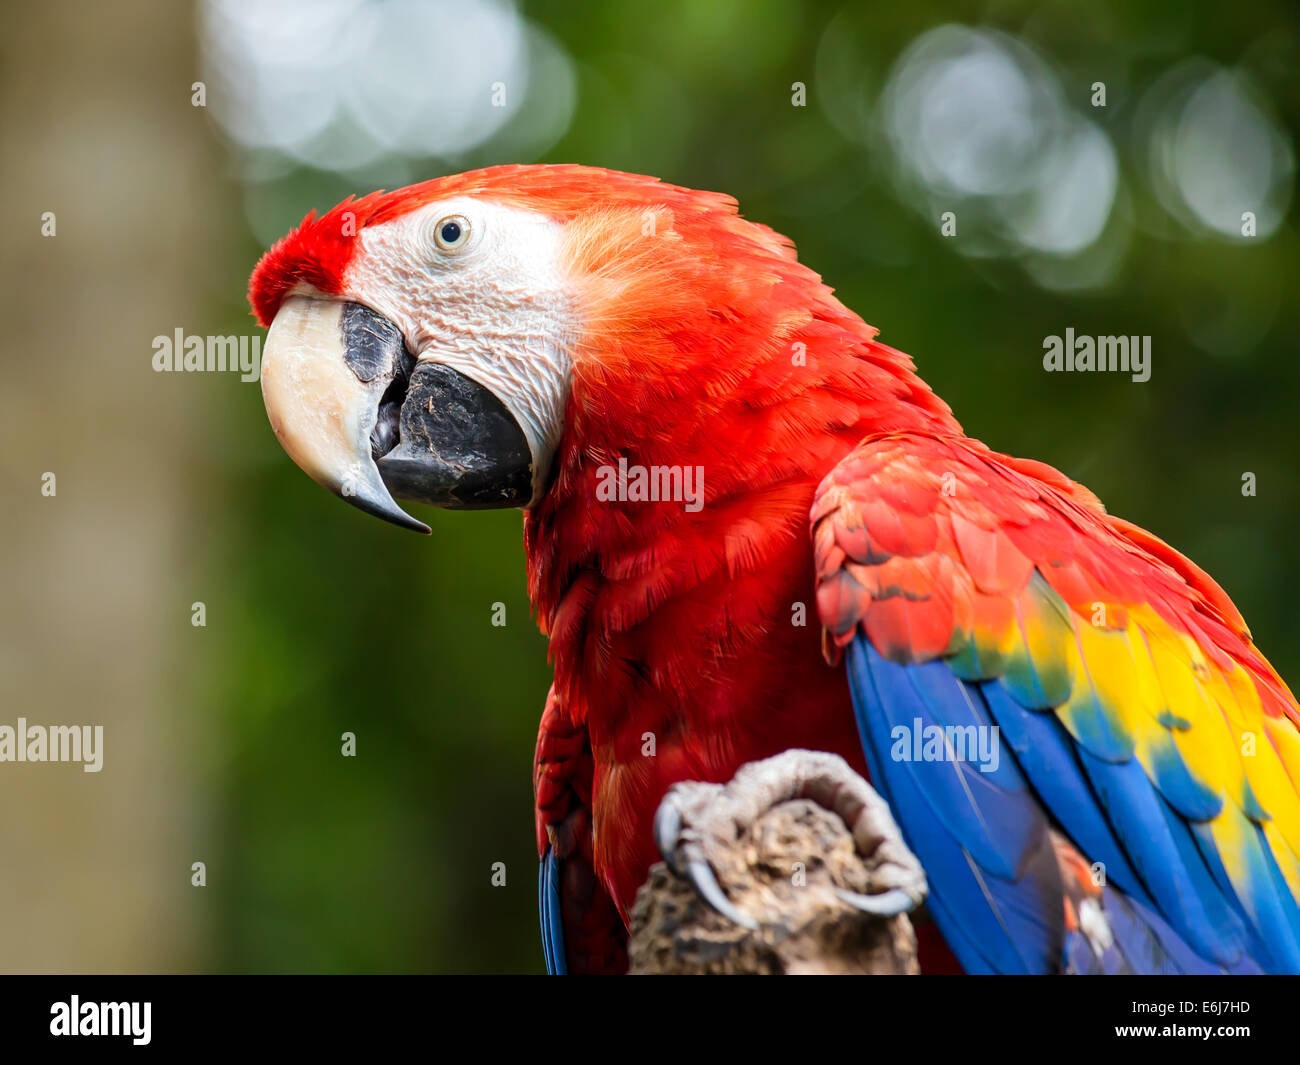 Portrait of colorful Scarlet Macaw parrot in Mexico Stock Photo